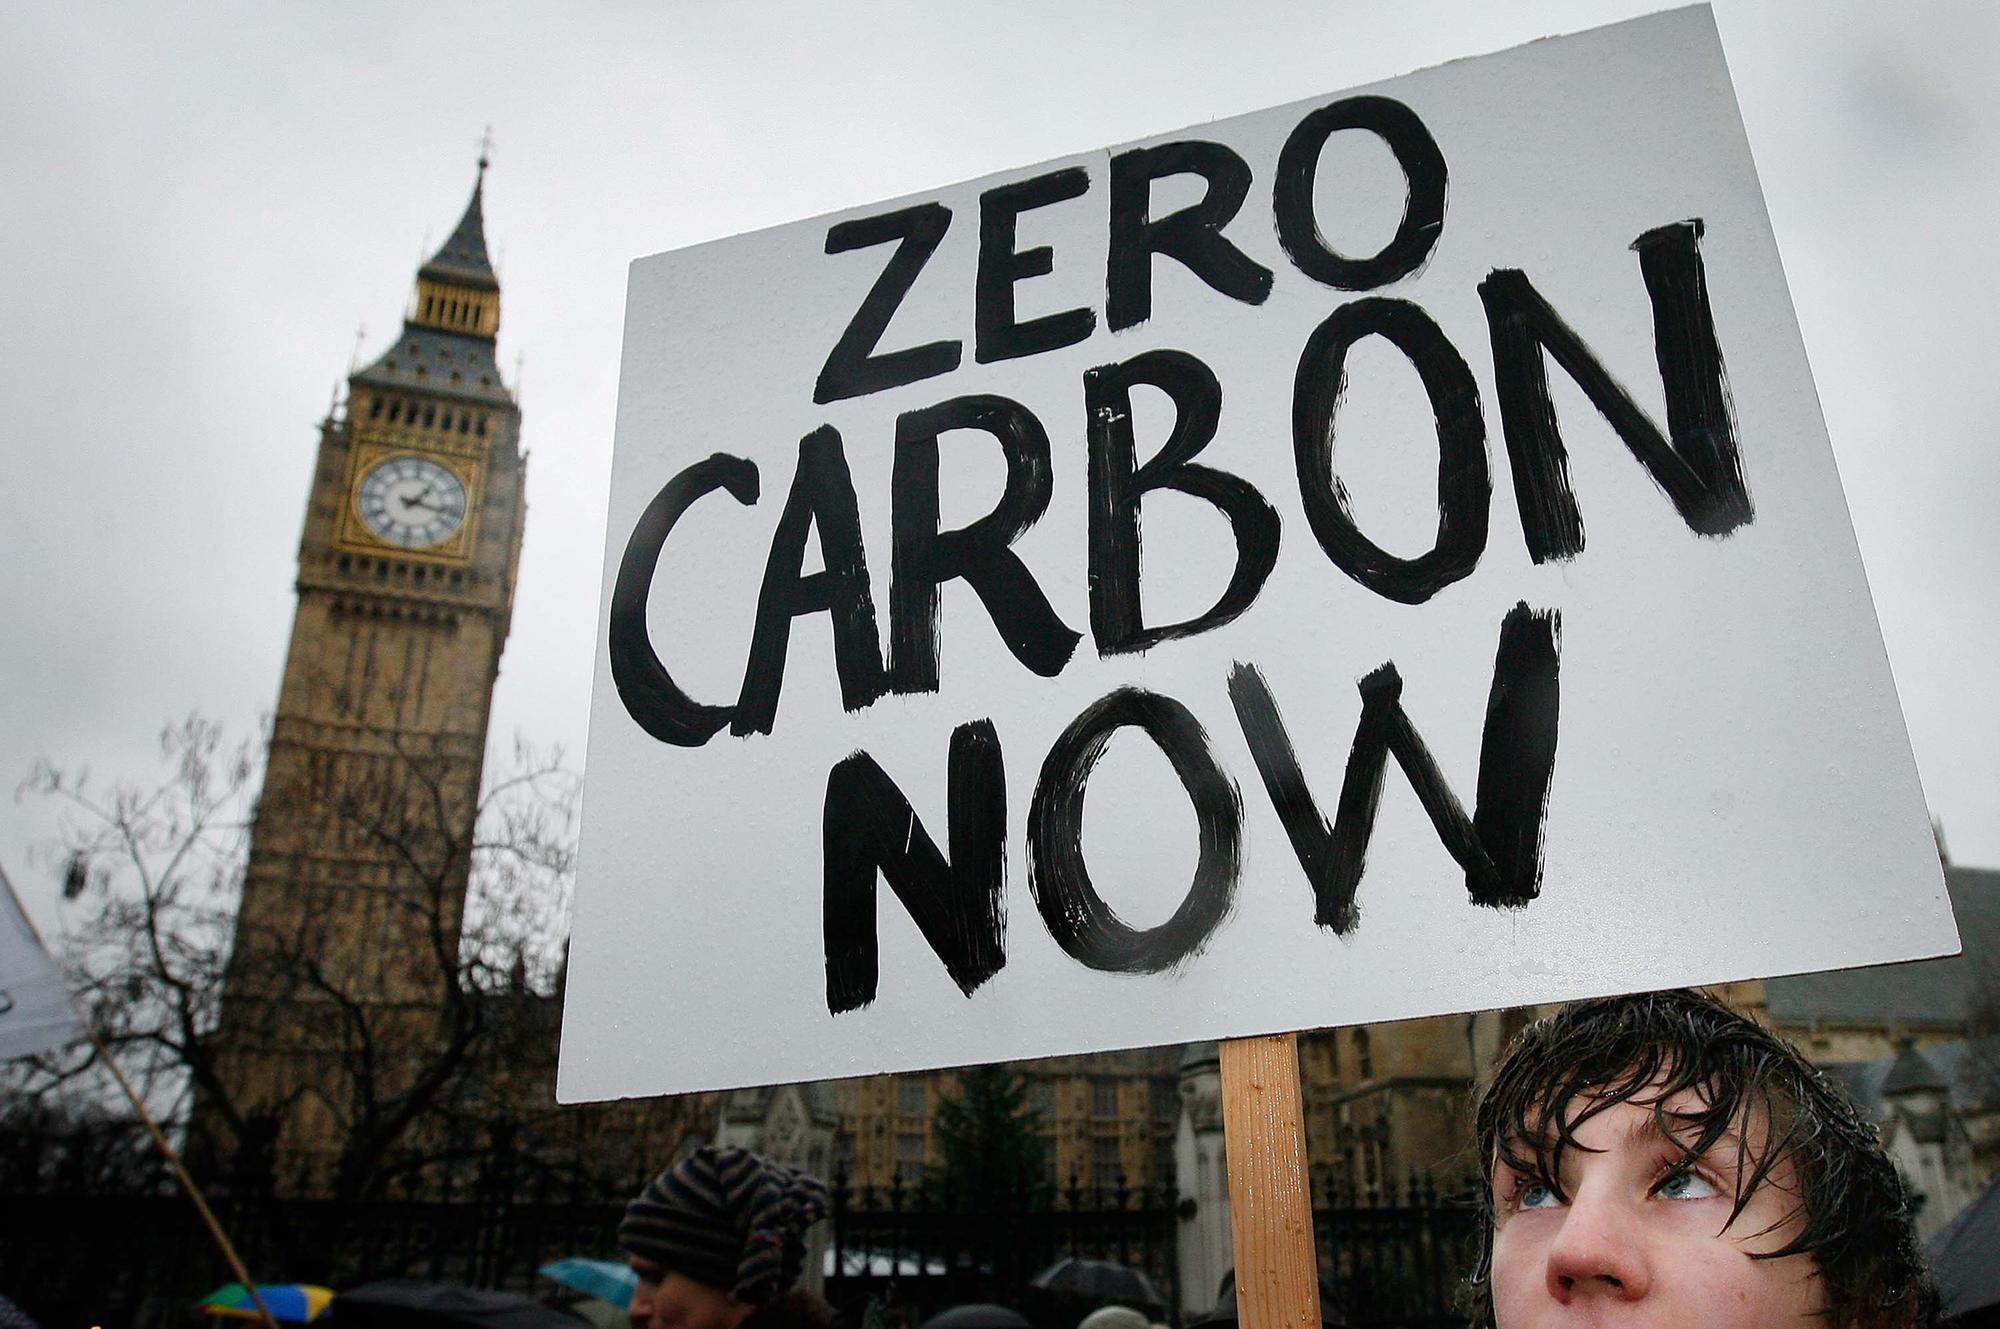 Climate change: carbon dioxide is the main greenhouse gas but cutting methane emissions is crucial too – Dr Richard Dixon - The Scotsman